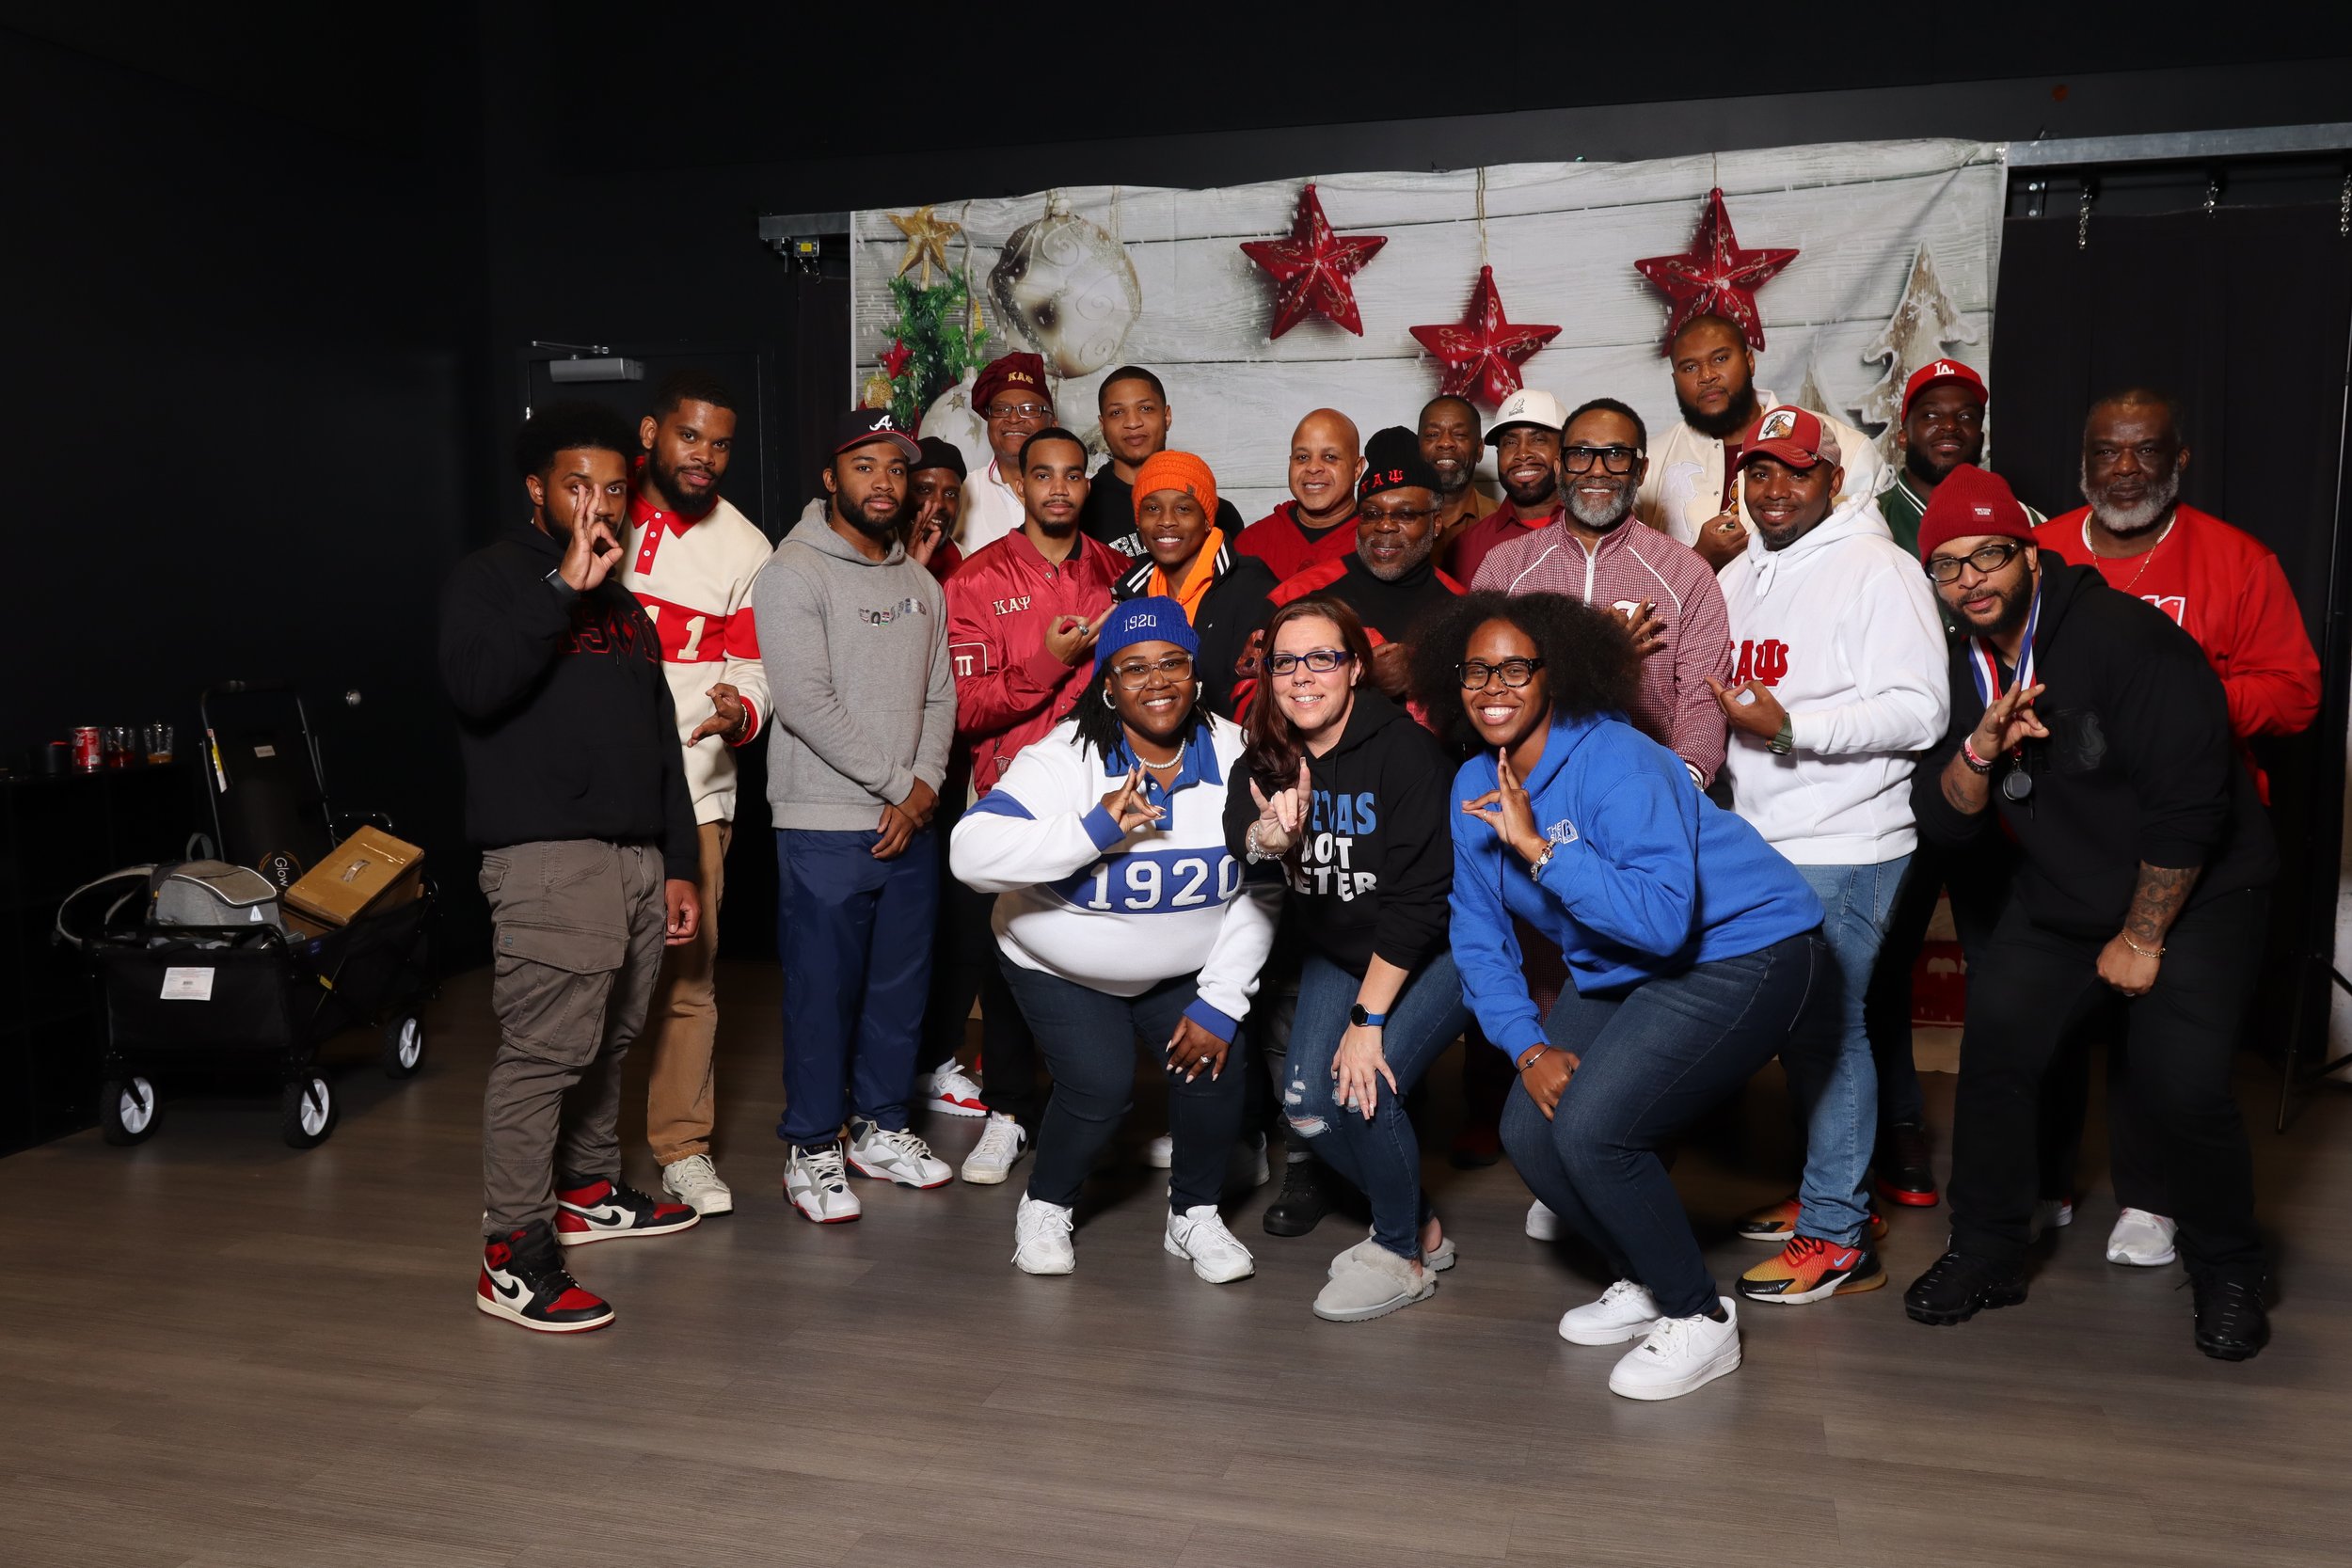 Nupes group photo with the Zetas